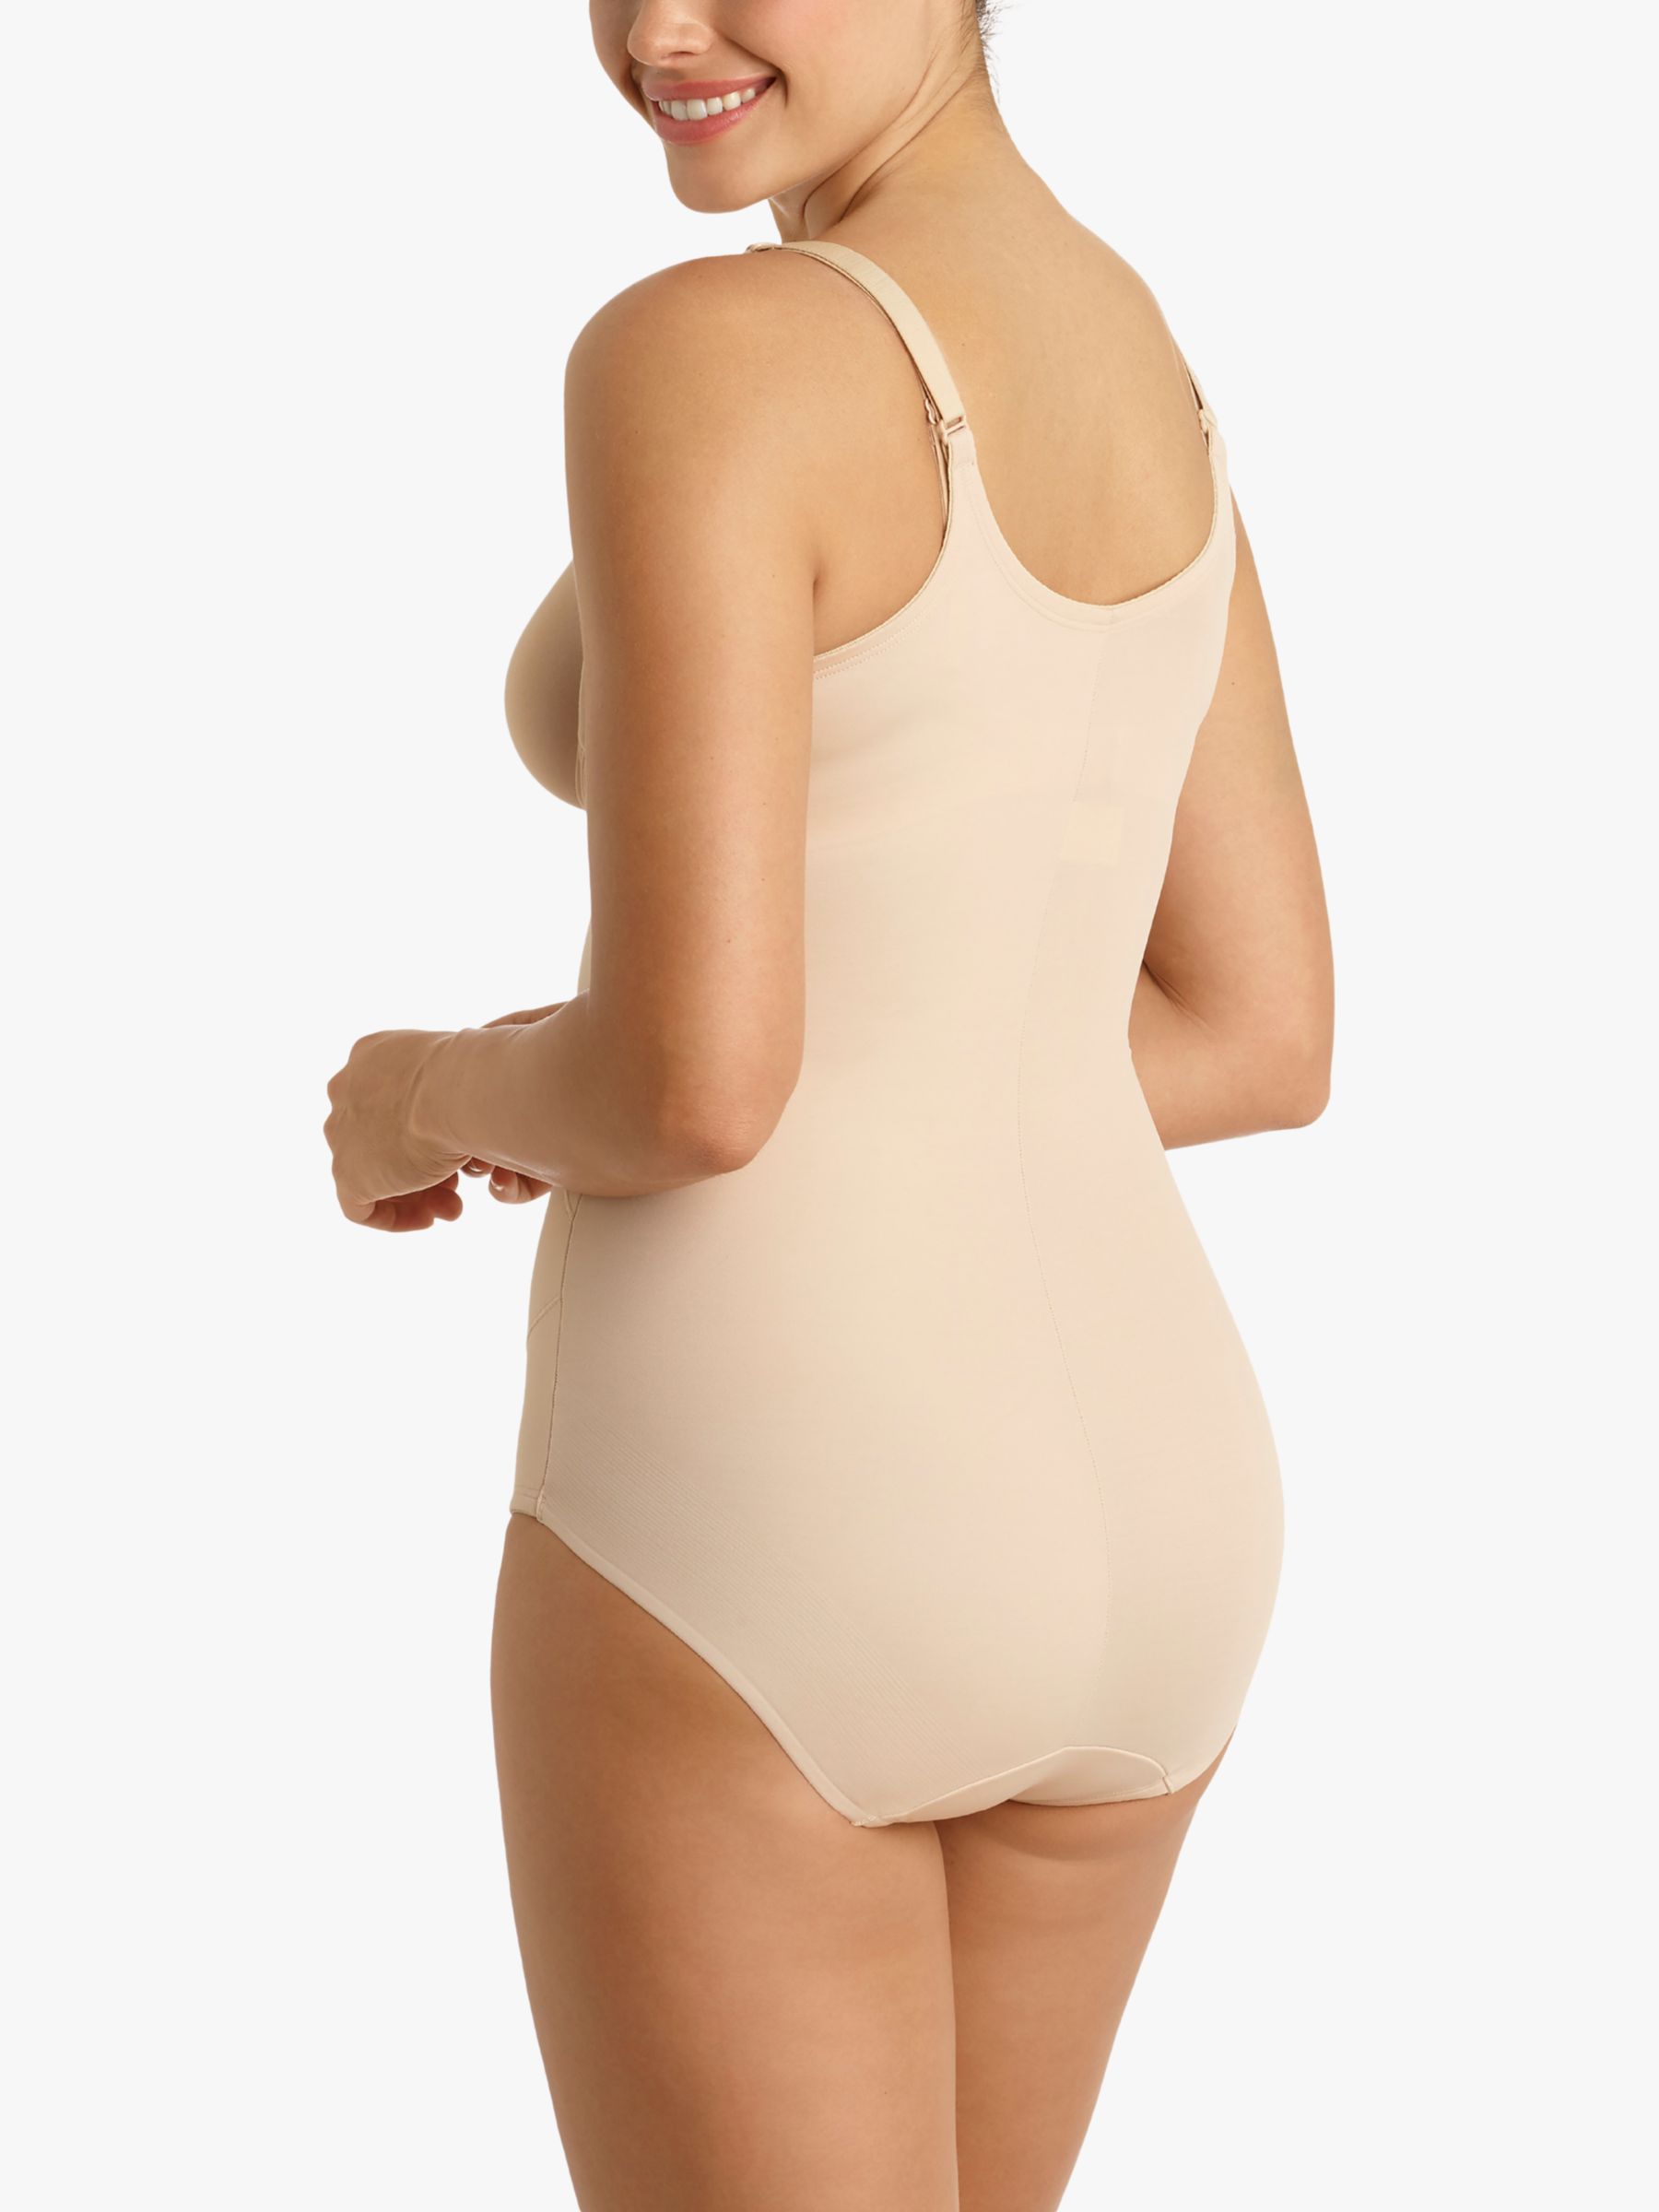 8 Best Spanx For Back Fat (Reviewed 2023)